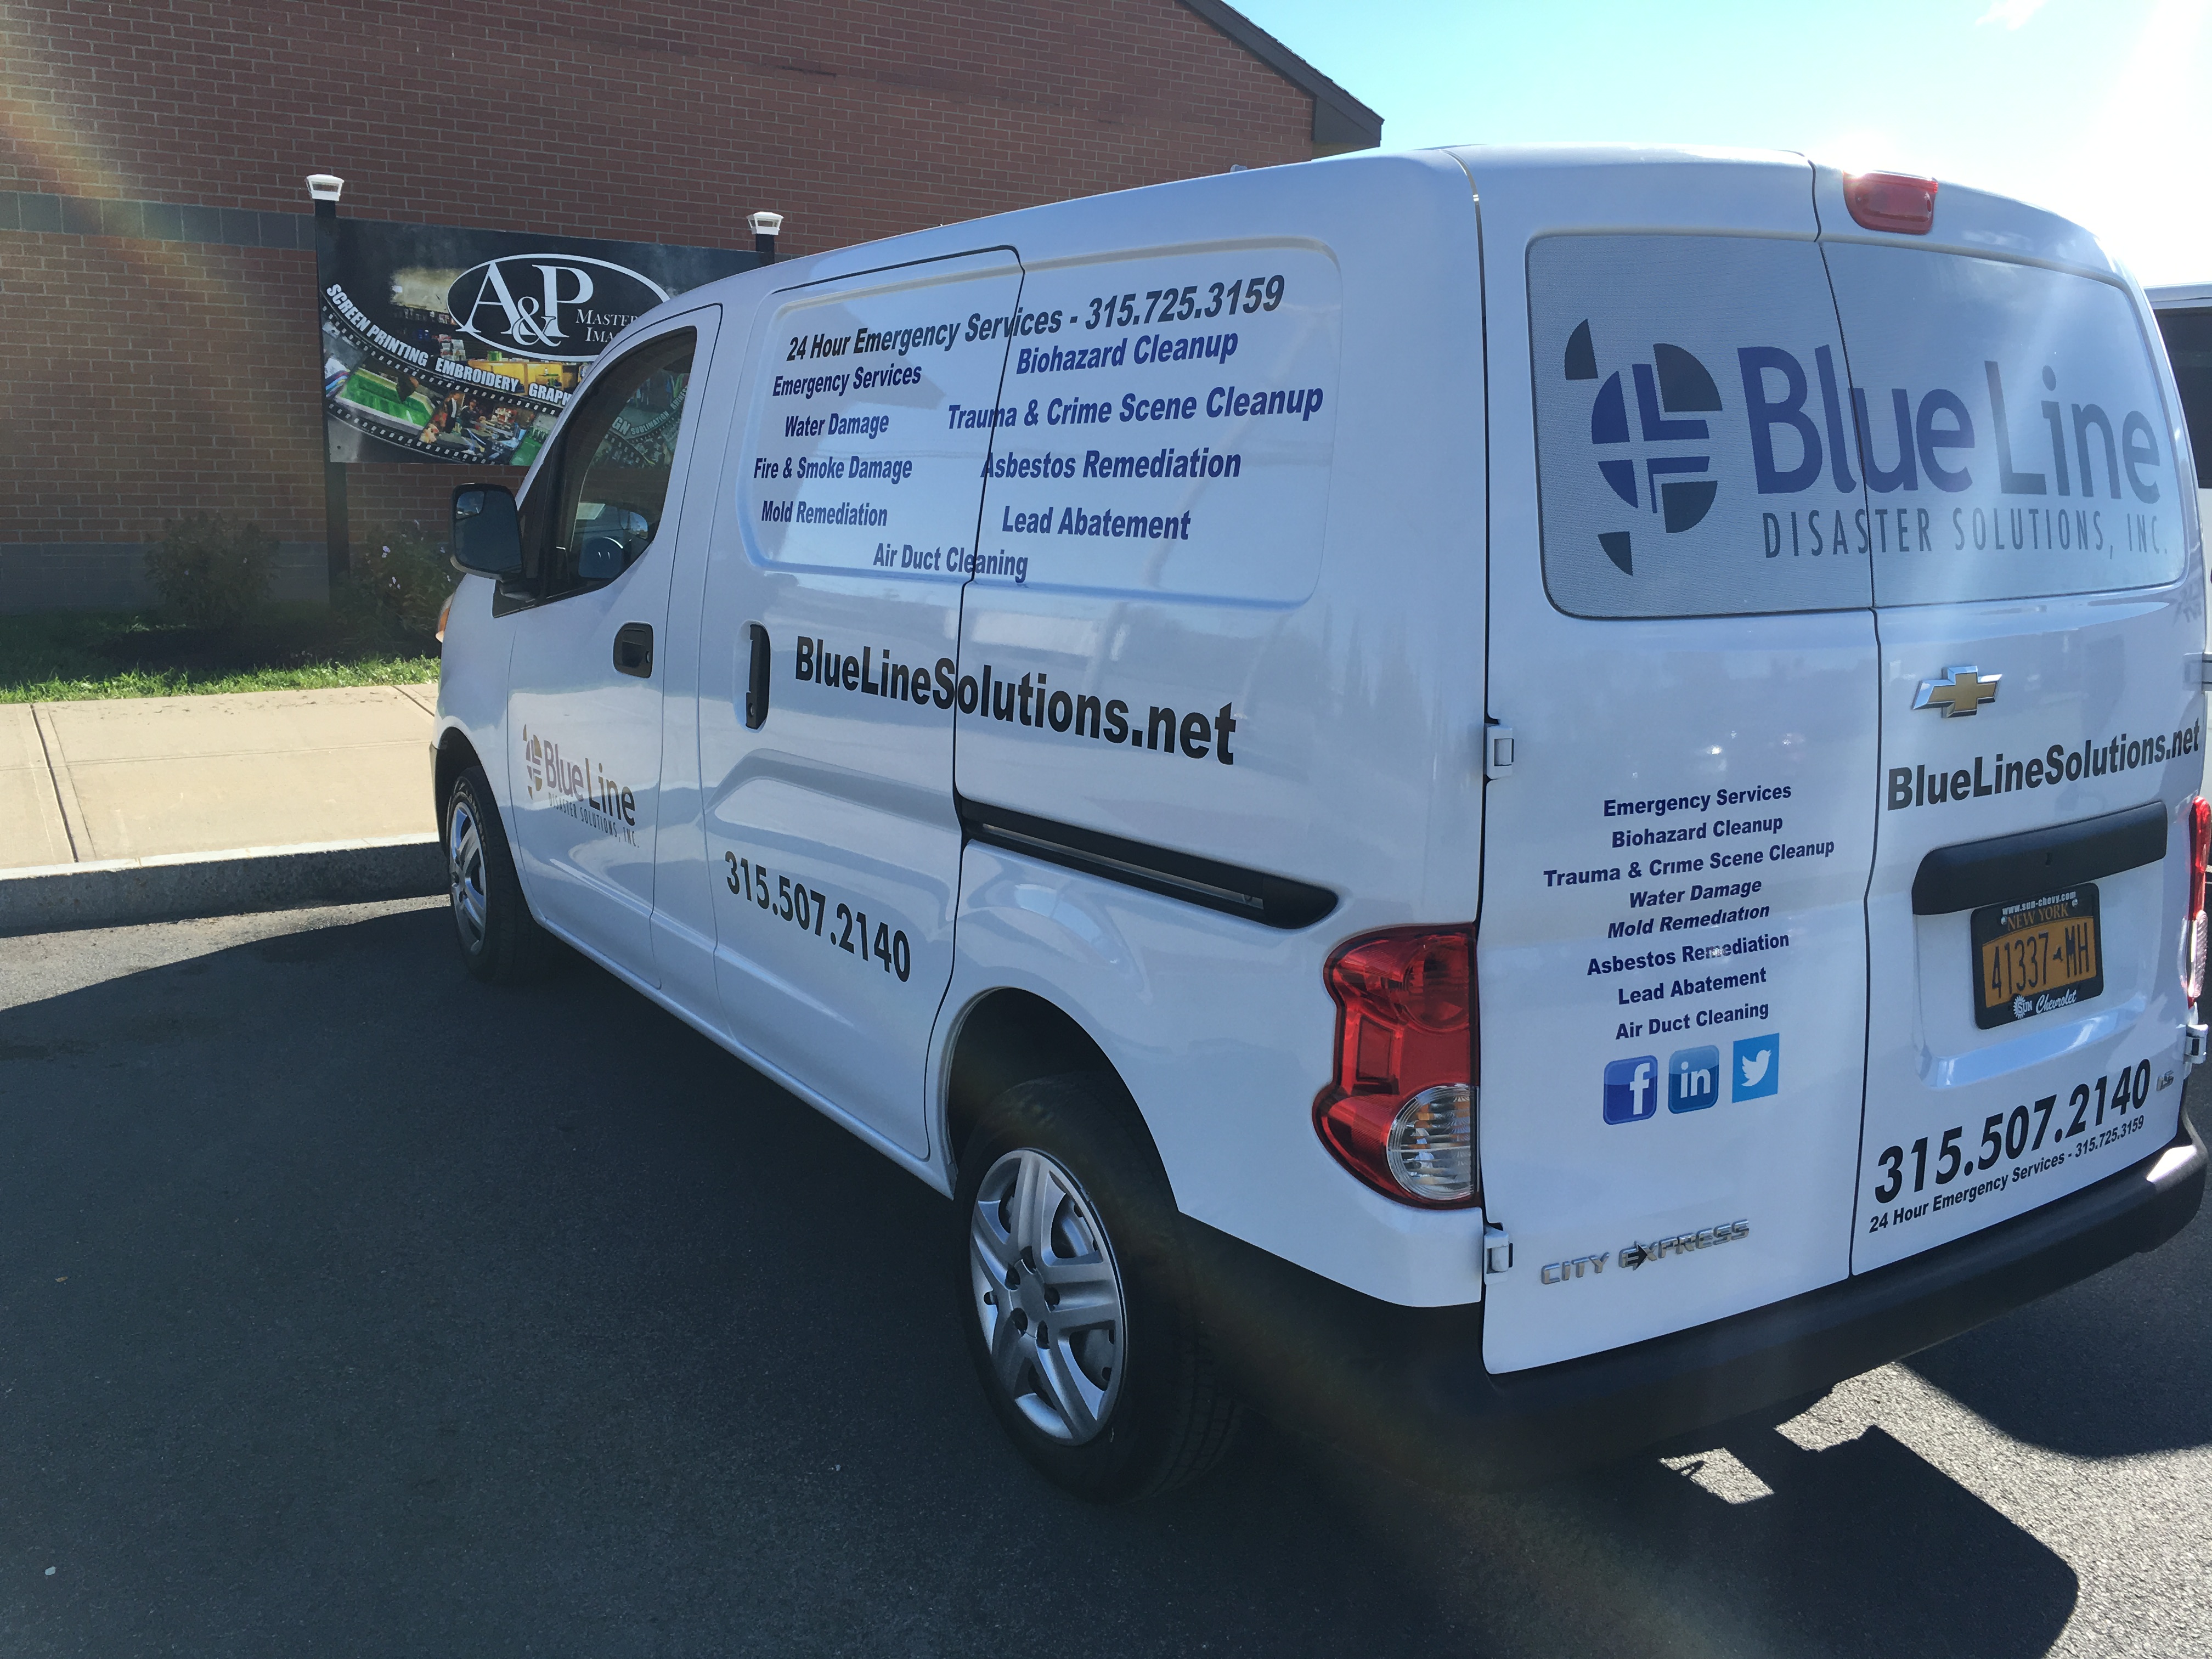 A&P Master Images Blue Line Disaster Solutions Van Wrap